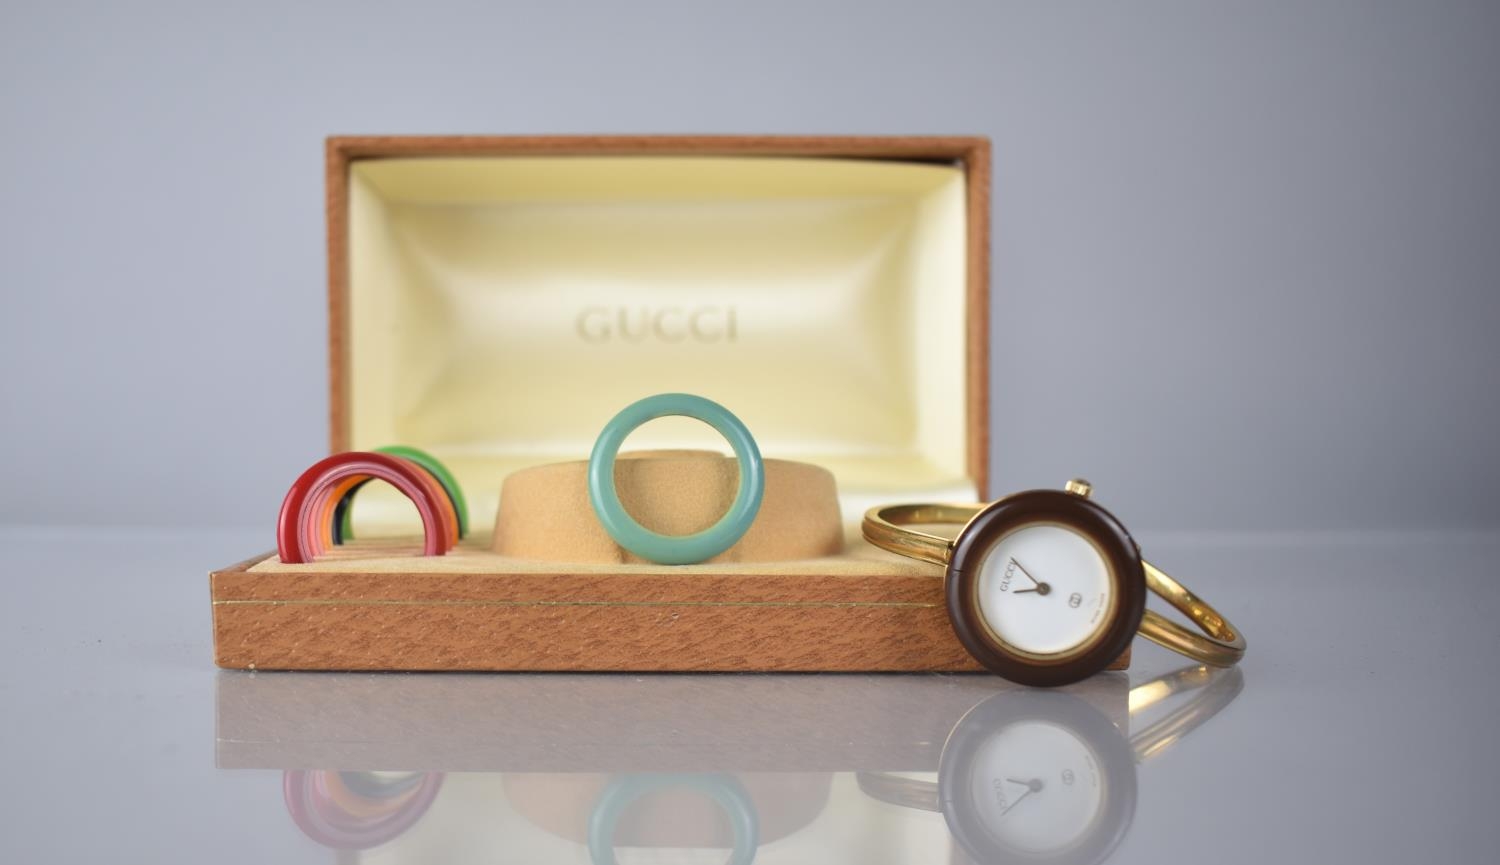 A Boxed Gucci Wrist Watch, White Enamel Dial Inscribed Gucci, Gold Coloured Hands, Interchangeable